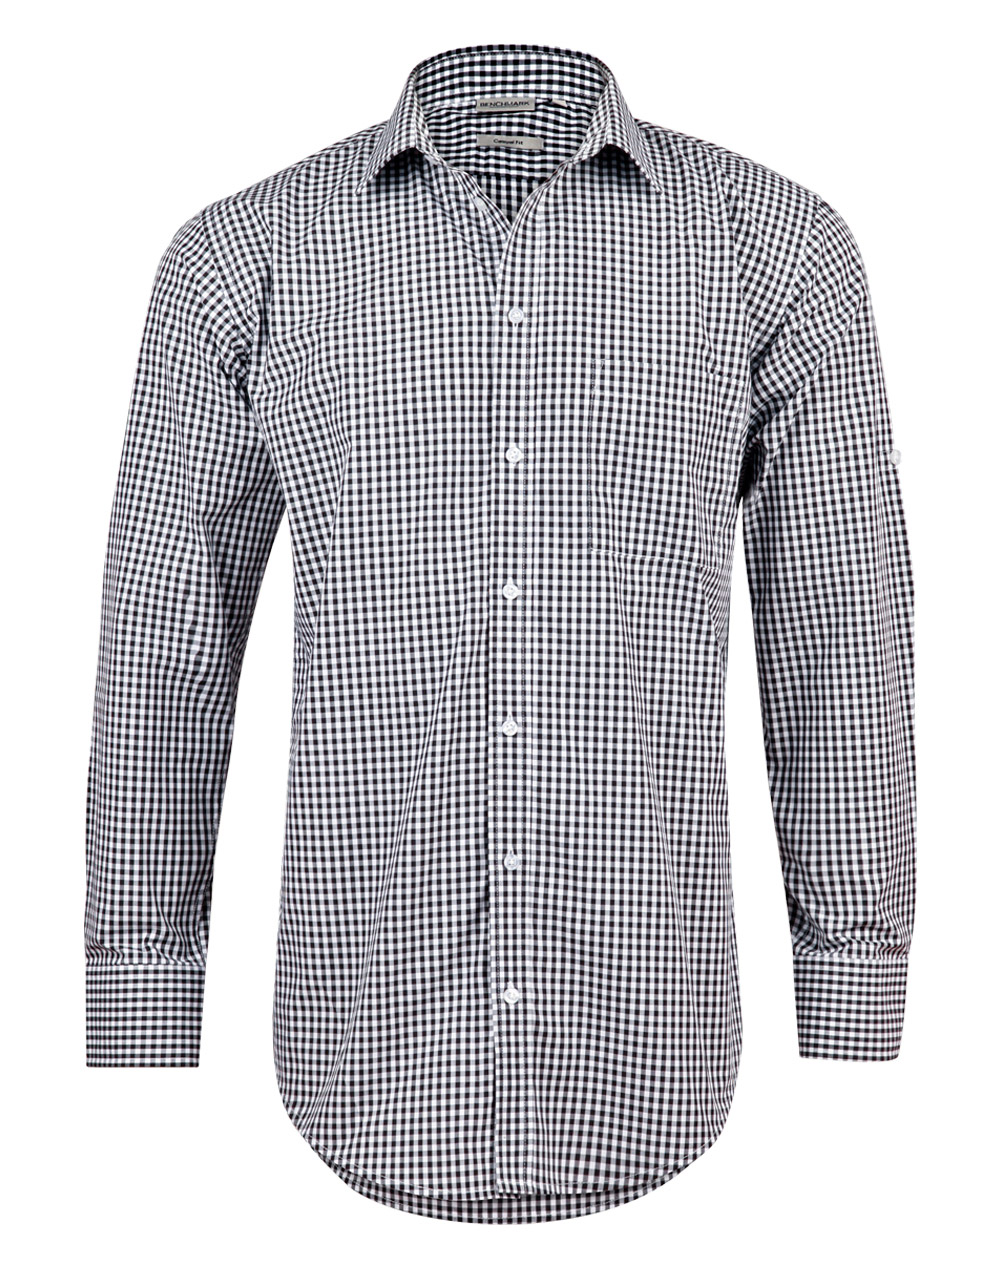 M7300L/M7300S  Men’s Gingham Check Long Sleeve Shirt With Roll-Up Tab Sleeve